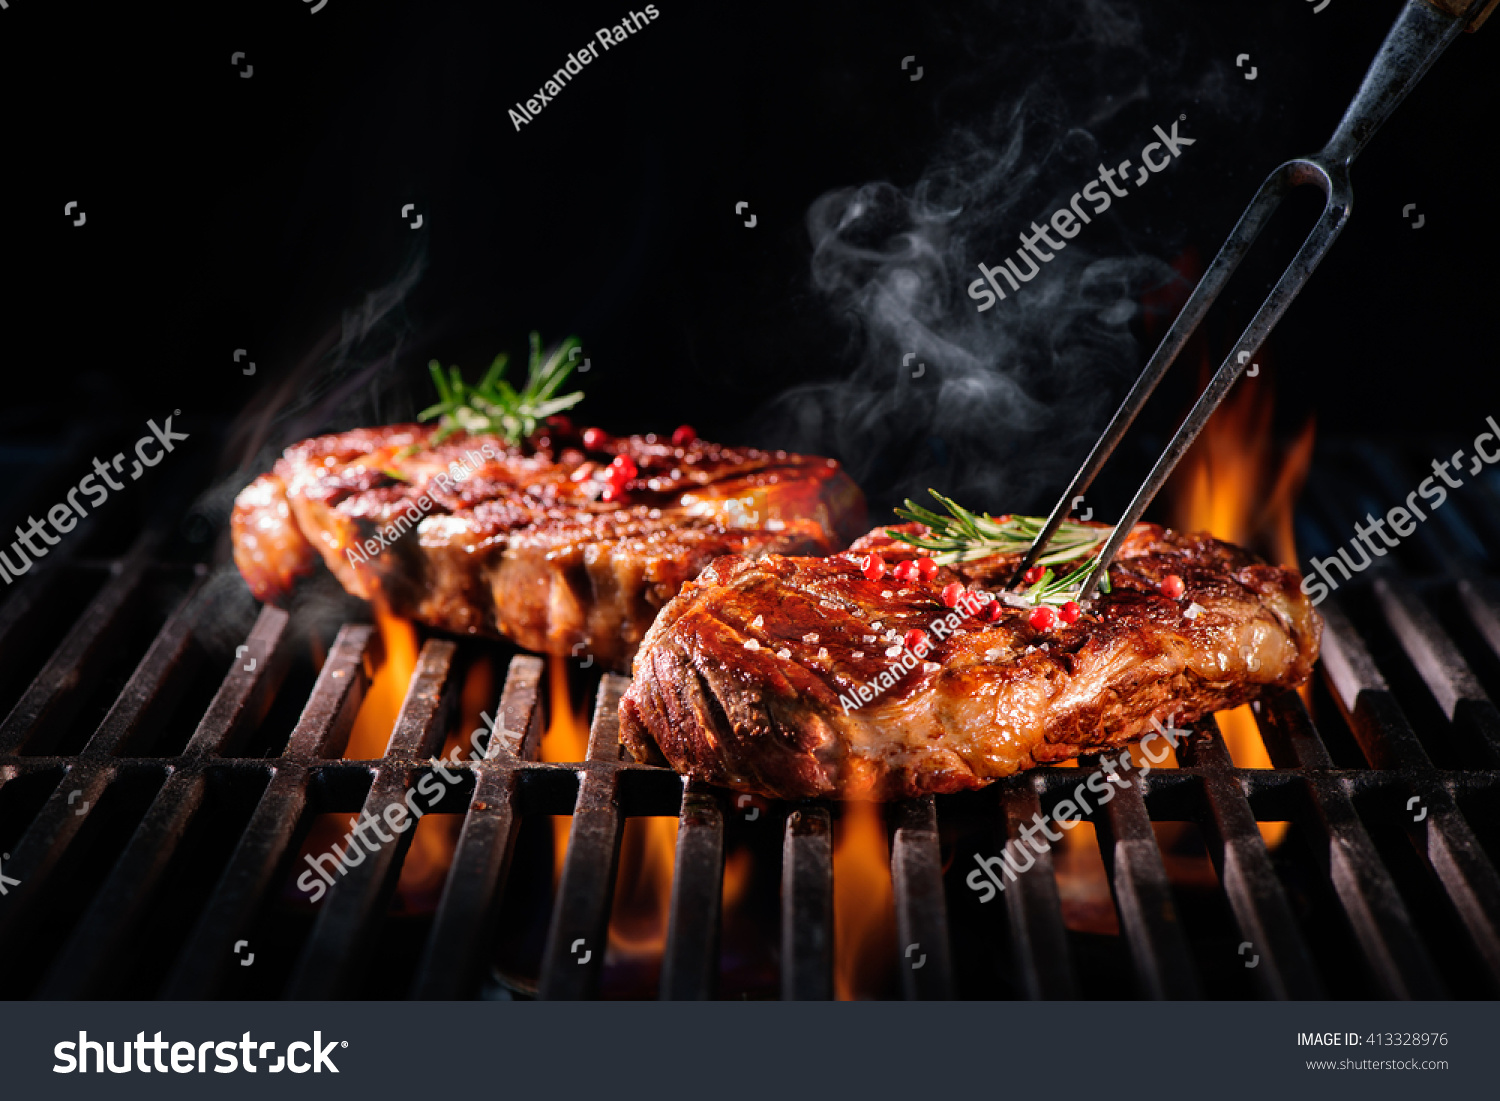 Beef steaks on the grill with flames #413328976